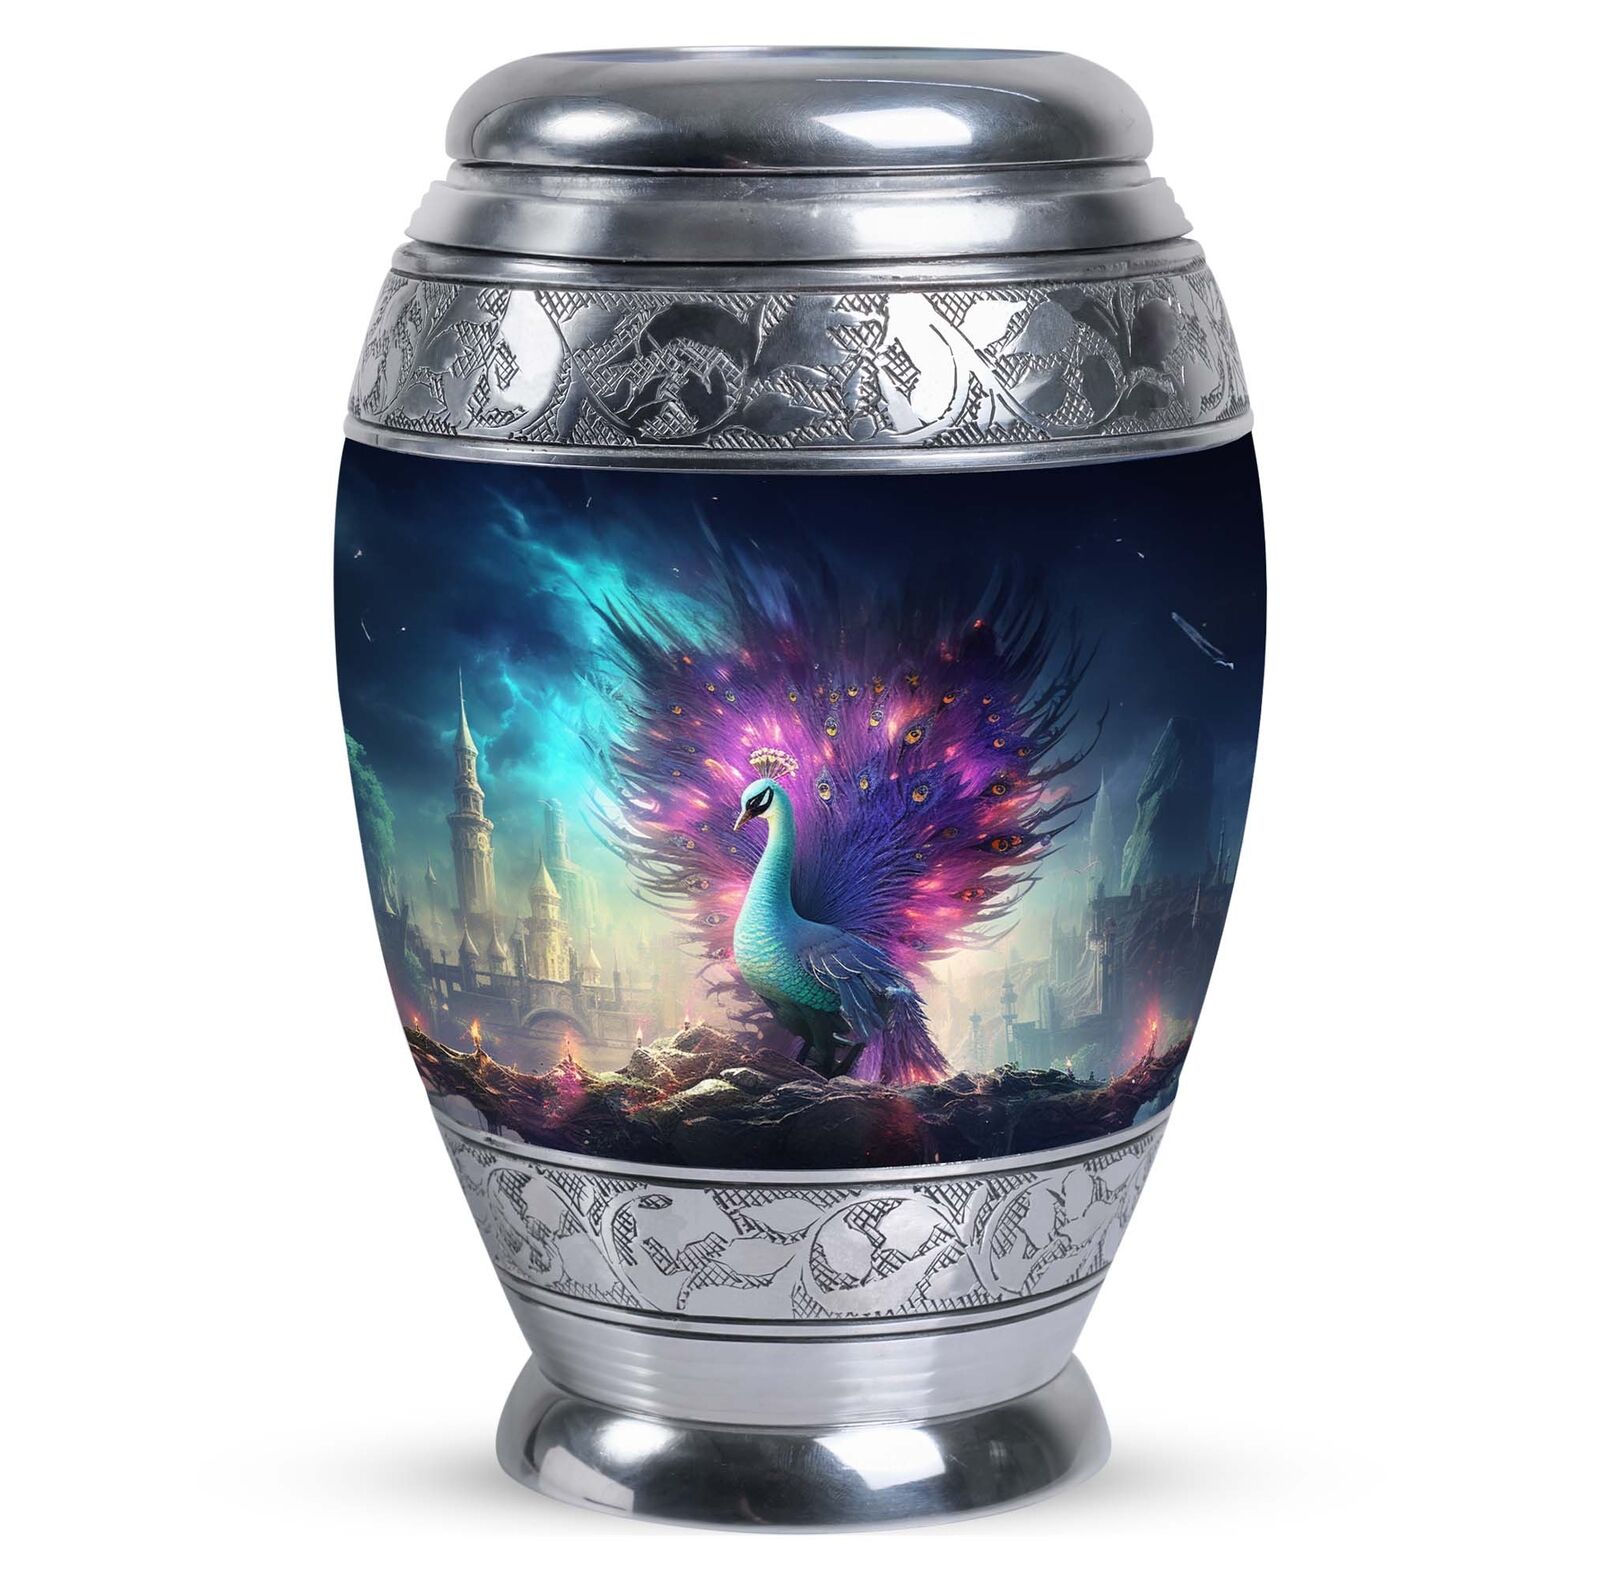 Peacock Protecting a Realm Cremation Urn Symbol of Strength Large Urns for Ashes